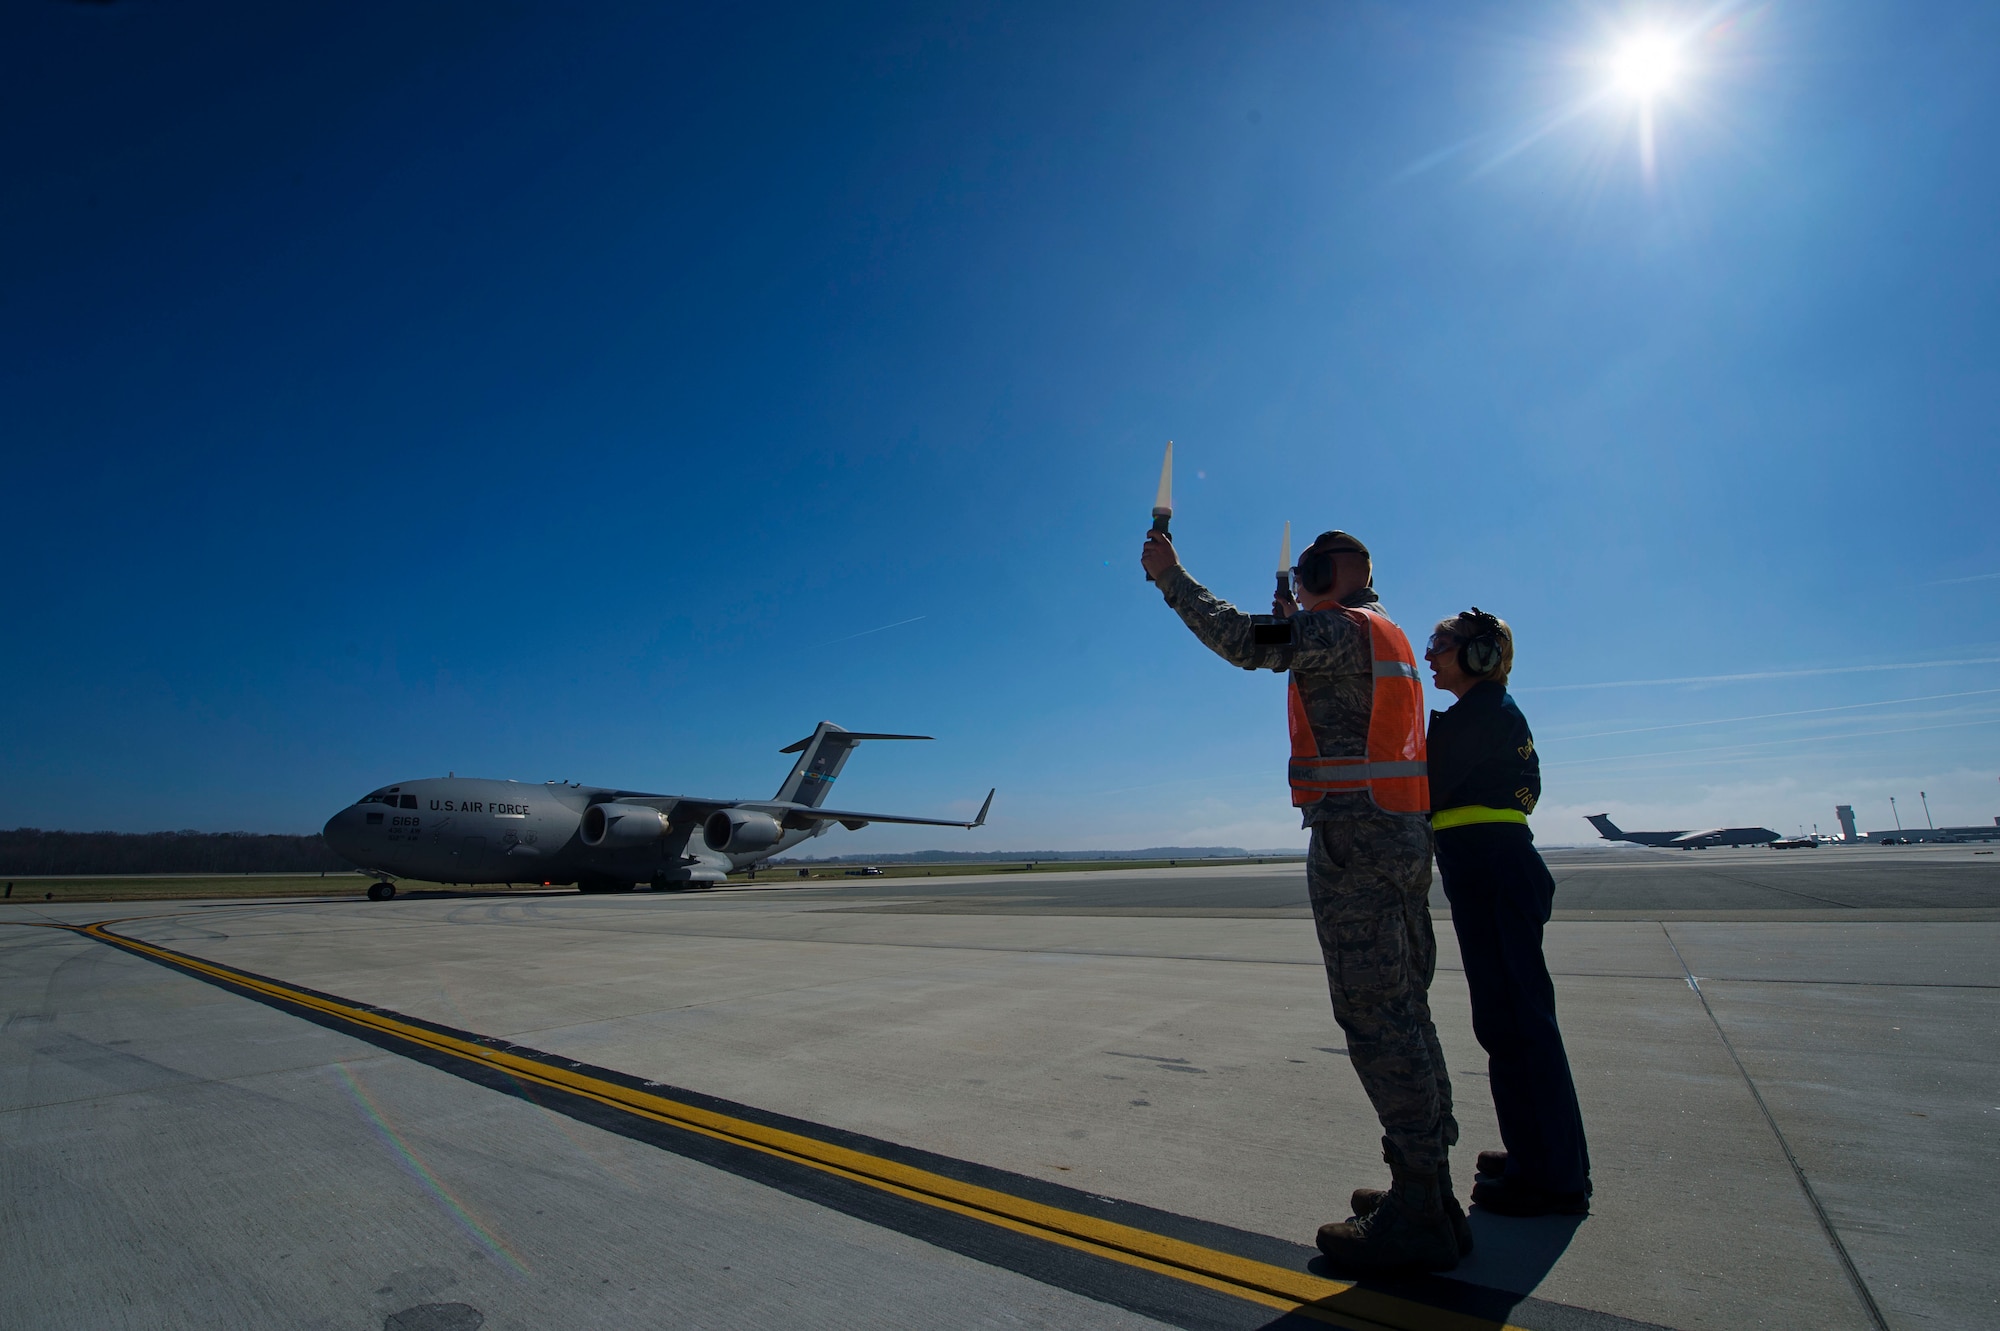 Tech. Sgt. Christine King (right), 512th Airlift Wing, explains to Airman 1st Class Anthony Mahon, 436th Airlift Wing, on safely marshalling a C-17 Globemaster III on the Dover Air Force Base, Del., flightline March 17, 2016. King frequently train young active duty Airmen and reservists who may need training in certain career fields. (U.S. Air Force photo/ Capt. Bernie Kale)